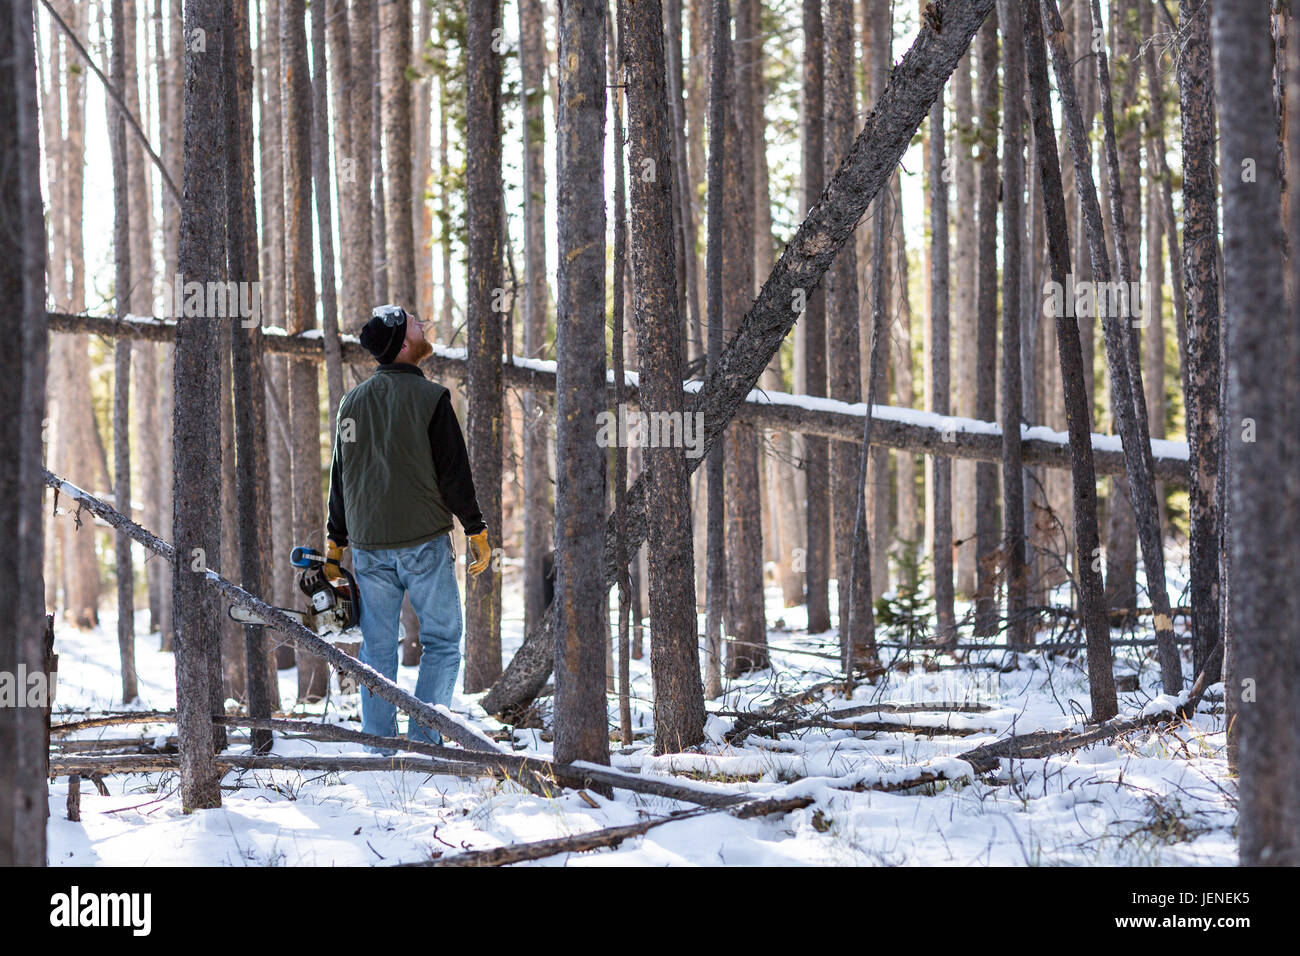 Man walking through forest with chainsaw looking up Stock Photo